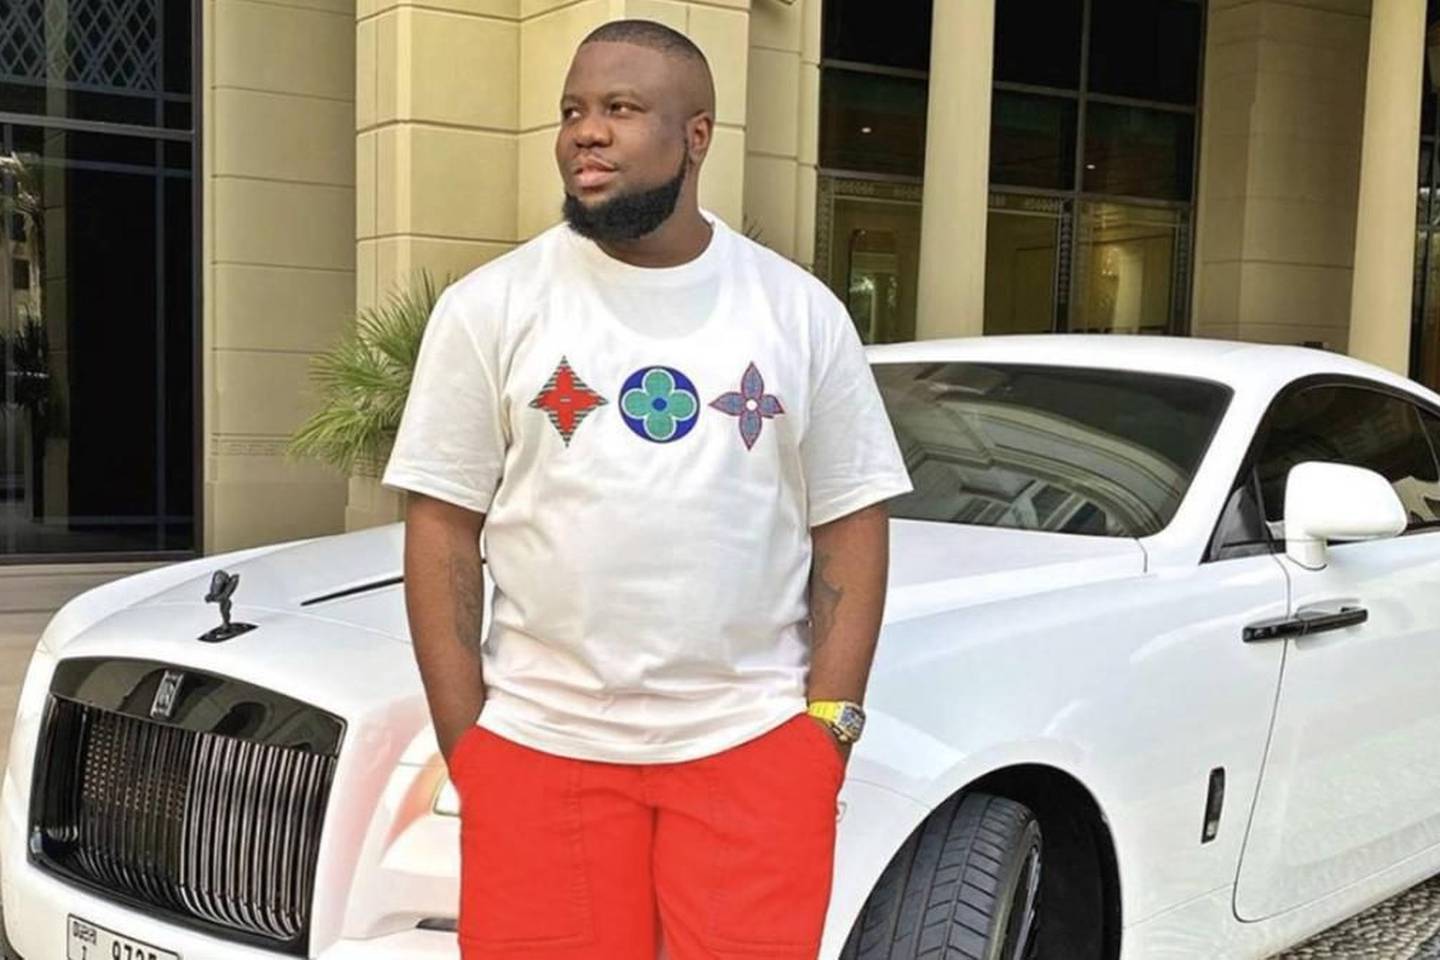 Instagram Influencer Hushpuppi's Rise Was Allegedly Fueled by